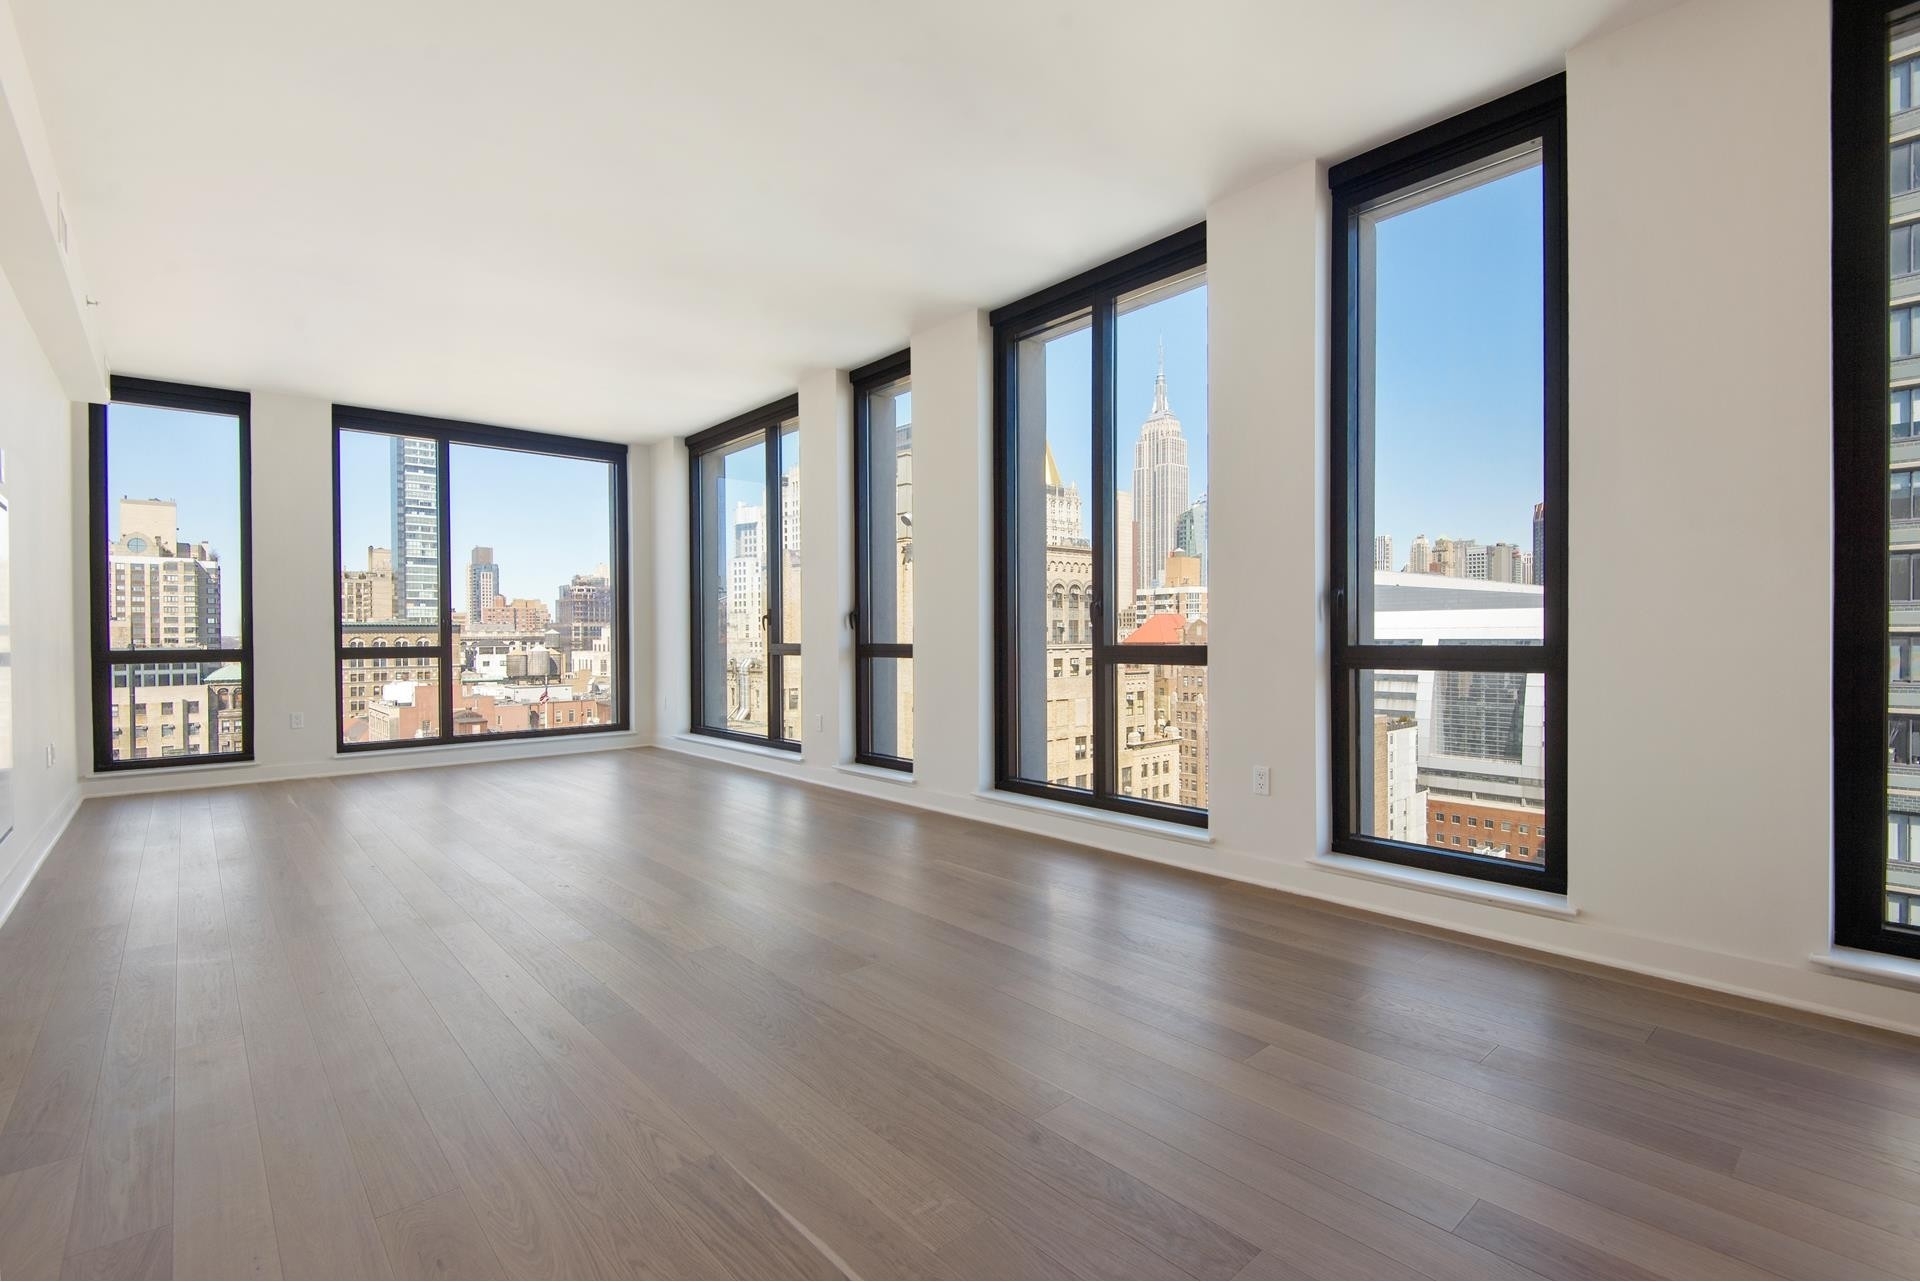 Property at 160 East 22nd St, PHA New York